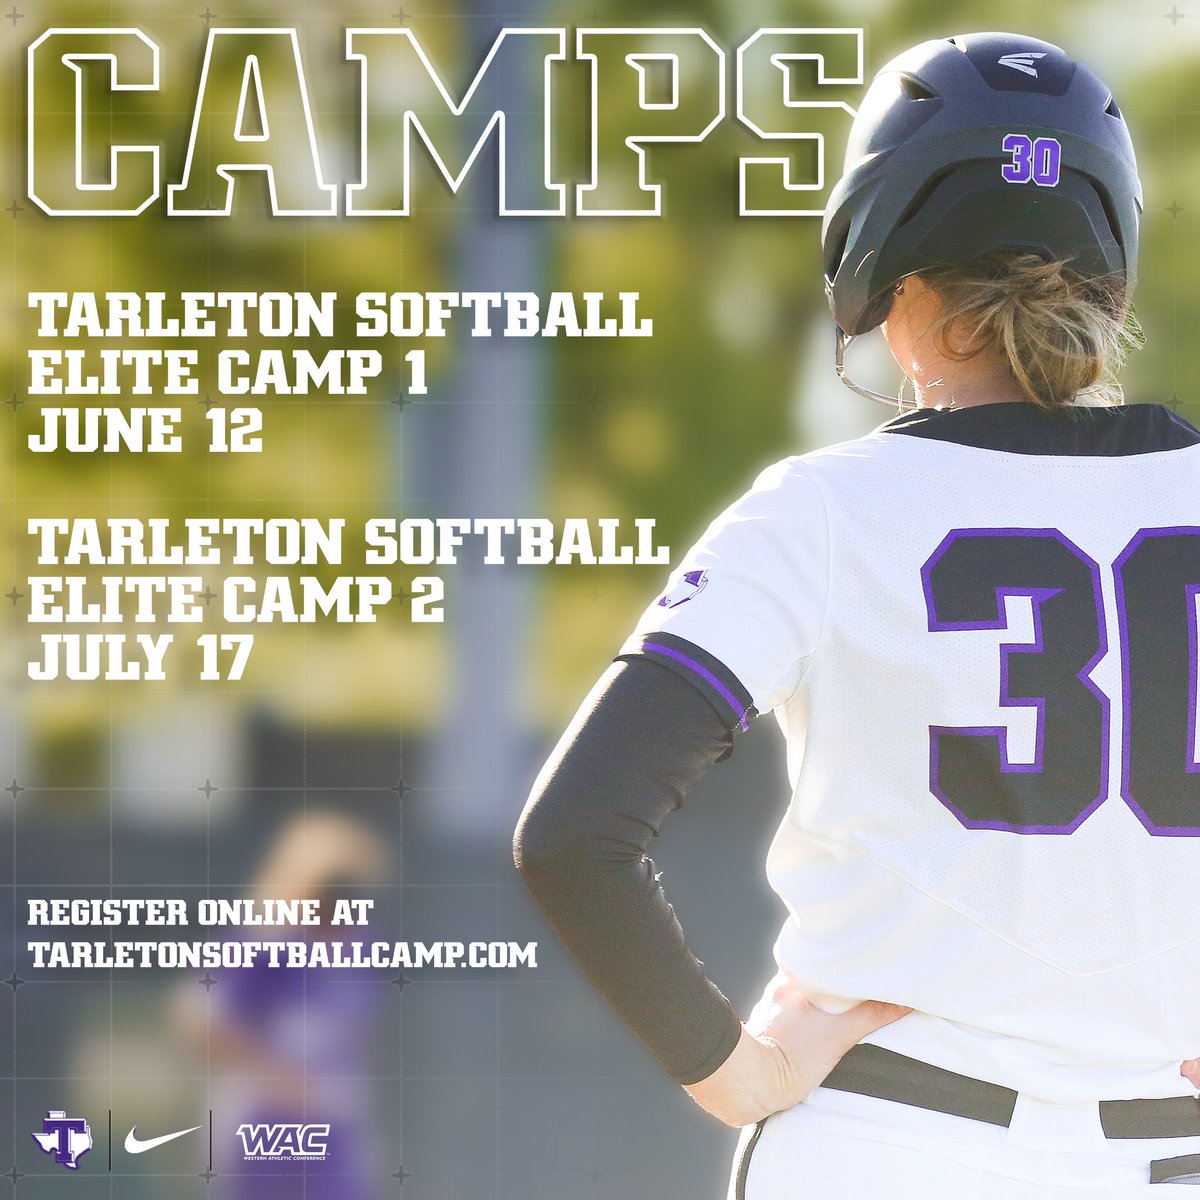 Don’t miss out on a great opportunity this summer!☀️ Read more: tinyurl.com/22fe4n83 #TexanSoftball